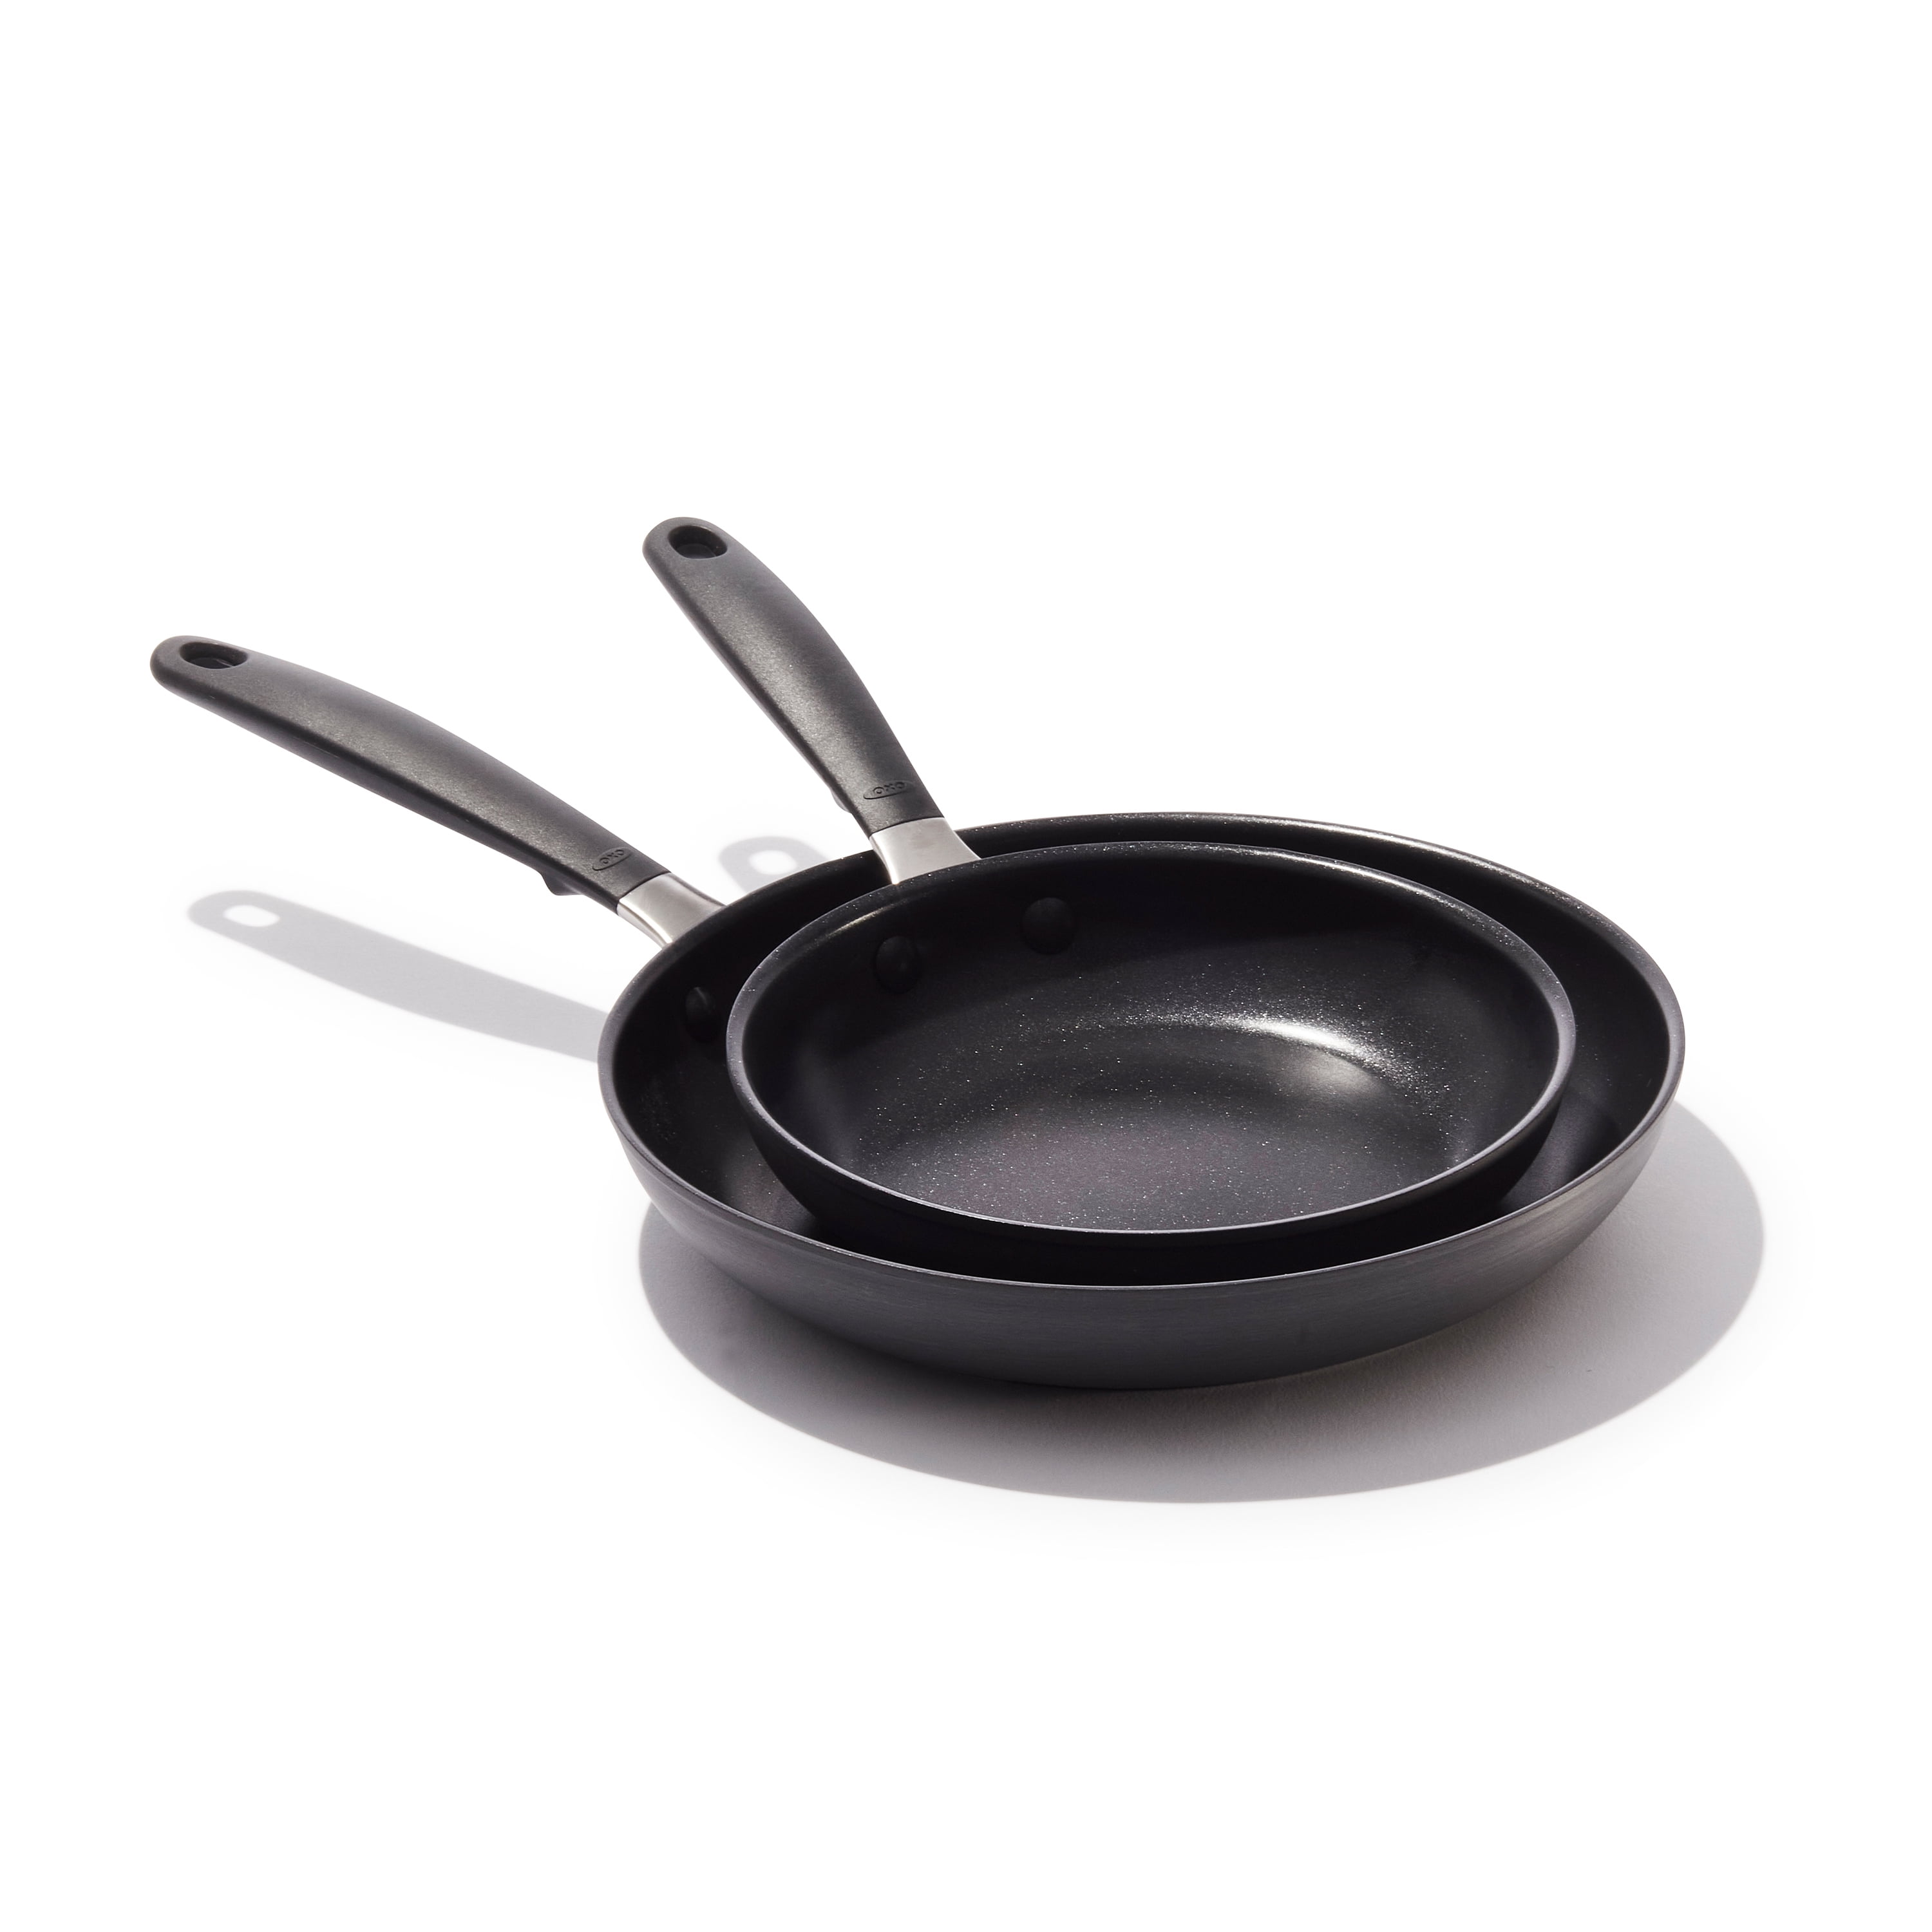 OXO Hard Anodized Nonstick Cookware, 2 Piece Frypan set, 8 and 10